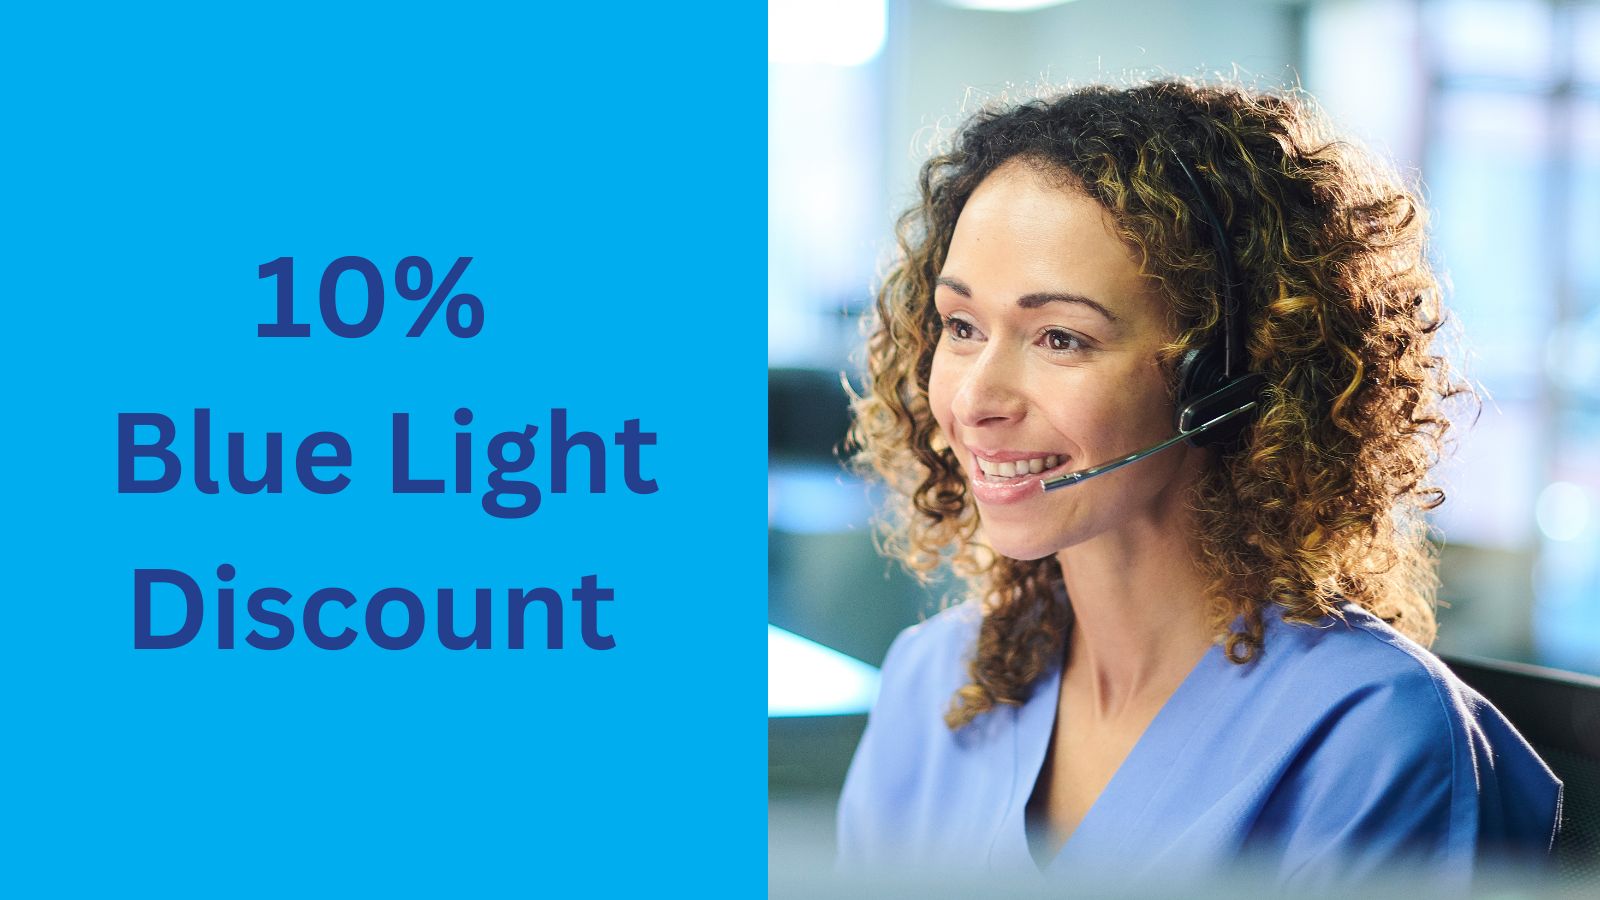 10% Discount to NHS and Blue Light Card Holders